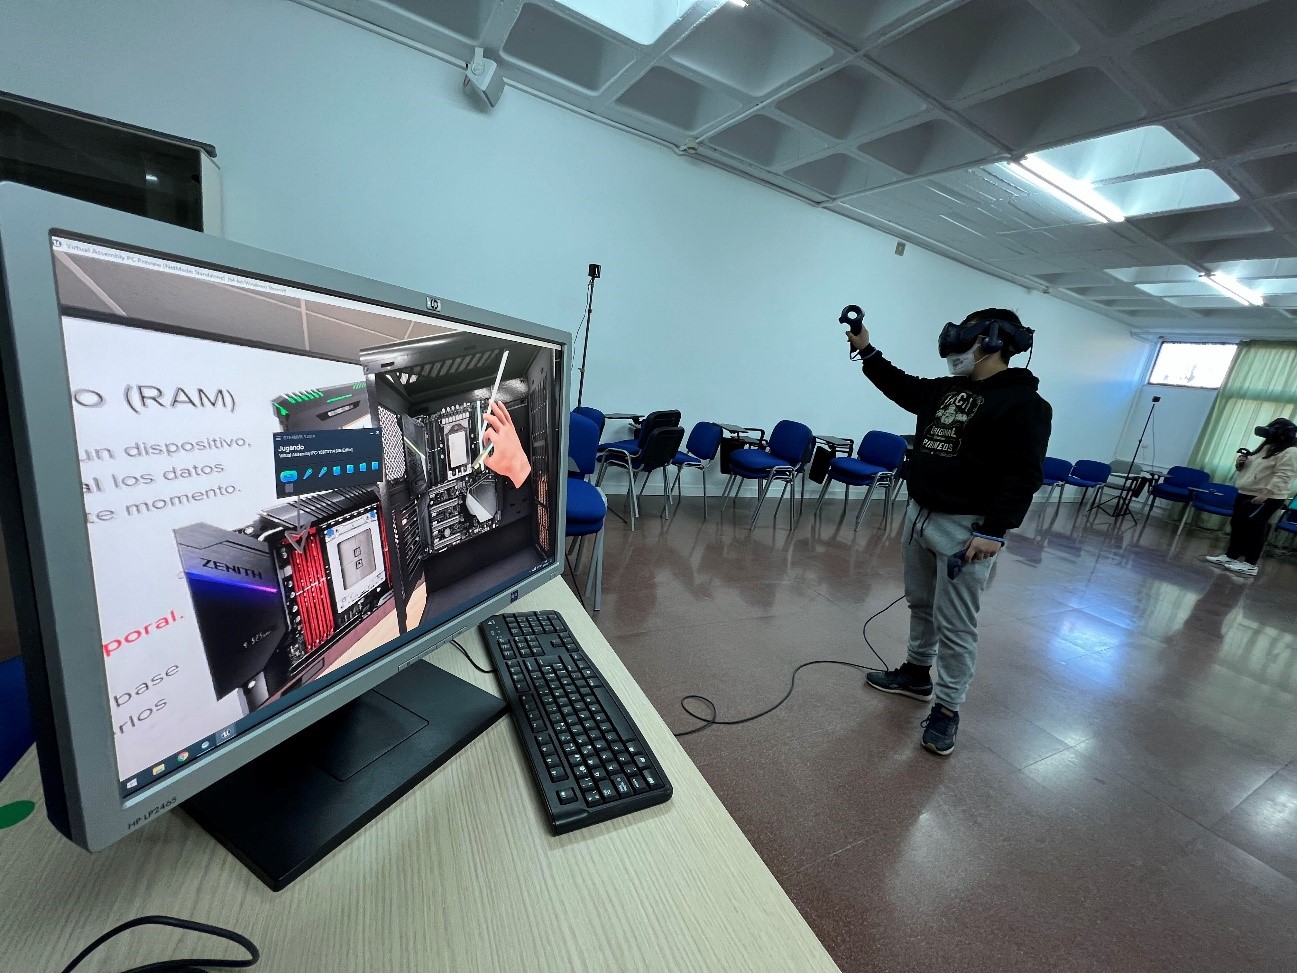 Virtual reality educational tool for learning improvement